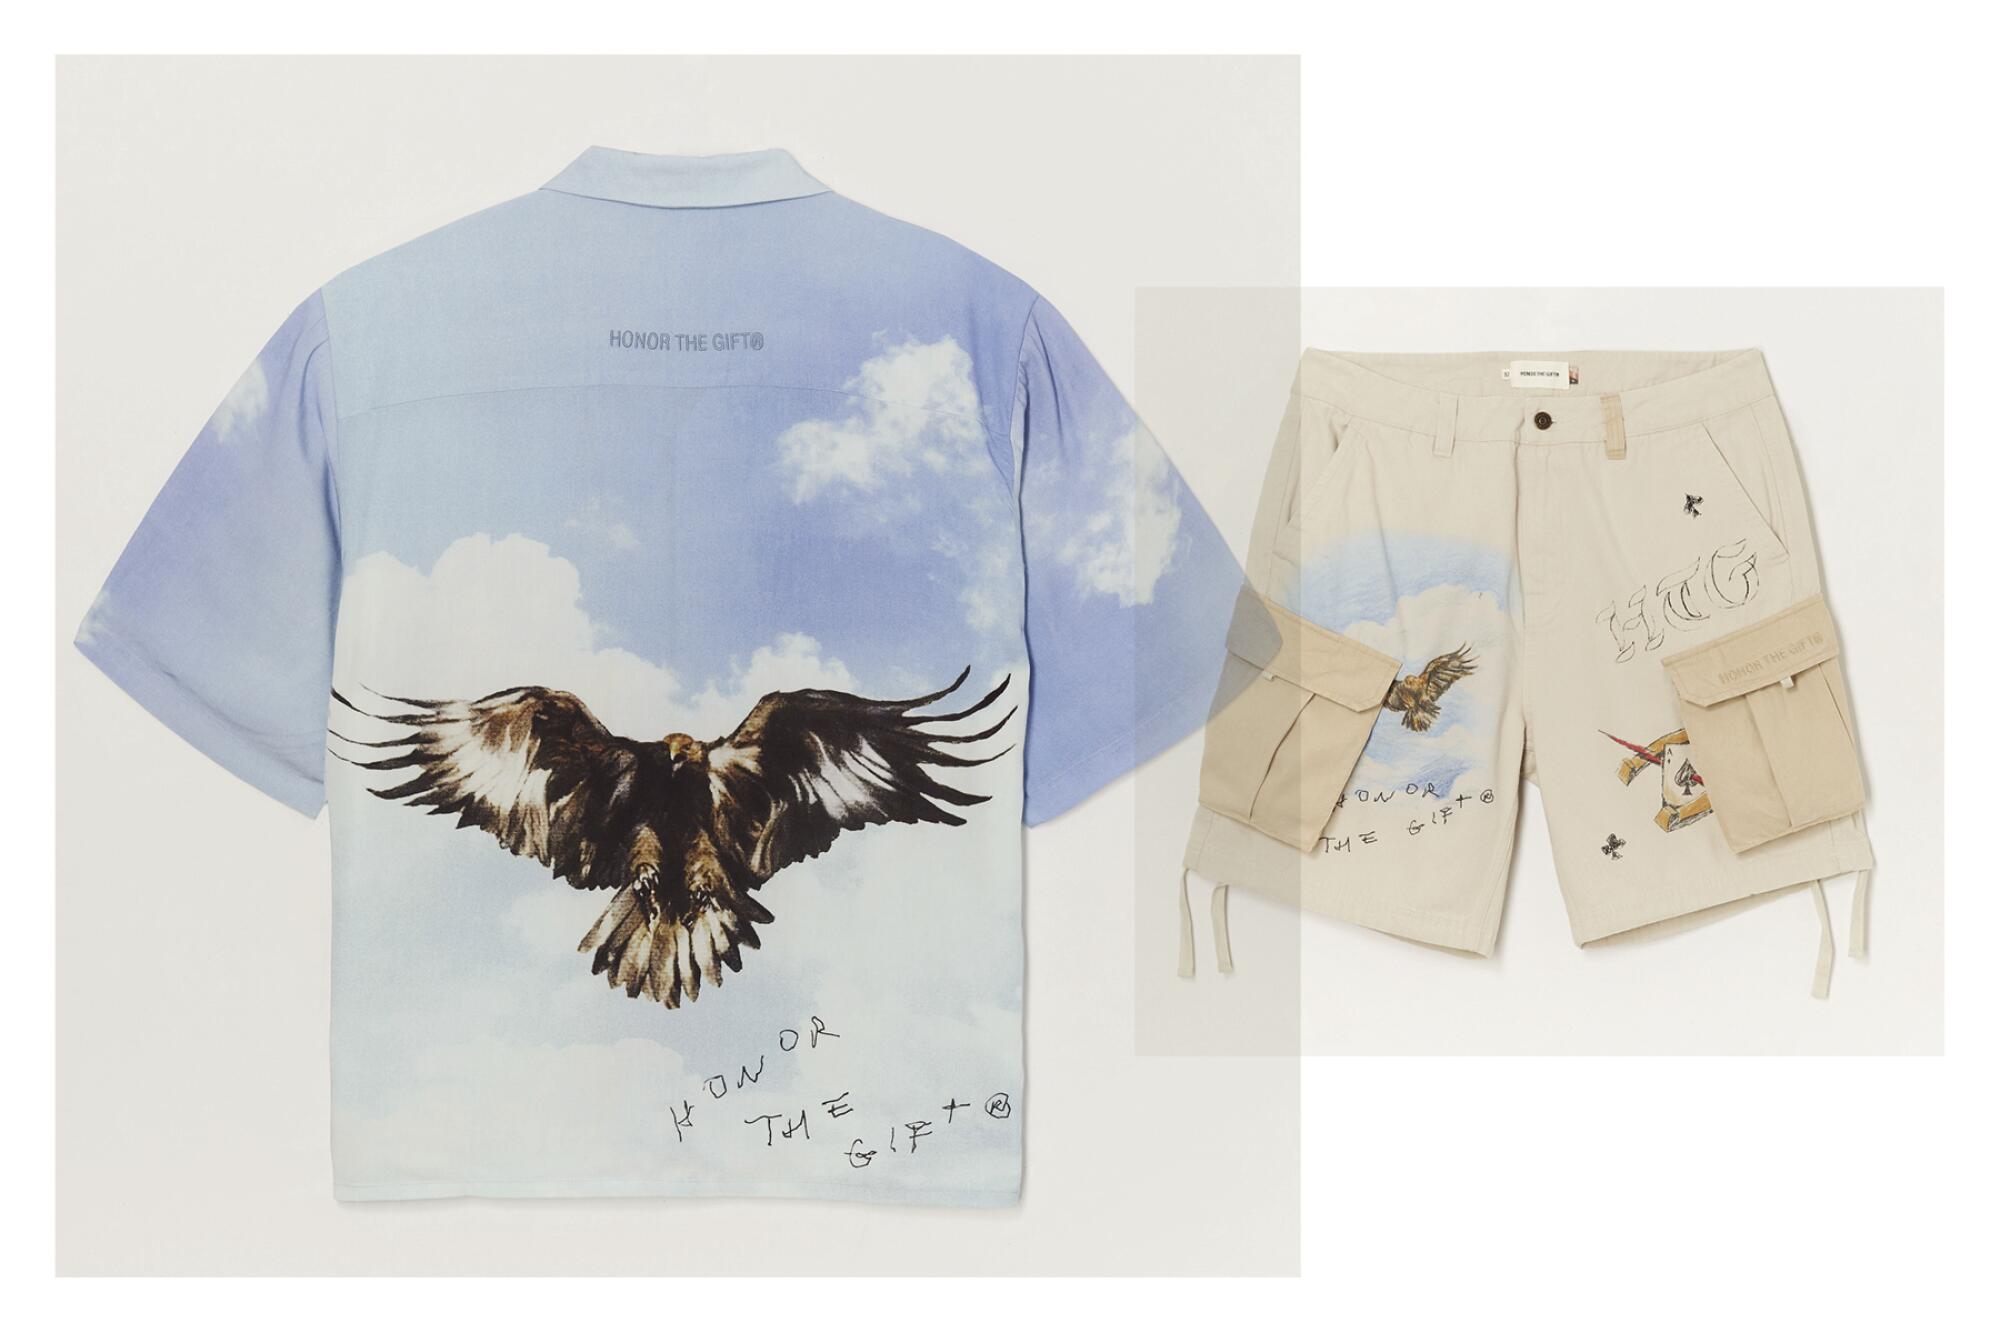 A shirt and shorts with designs featuring an eagle and the words "Honor the Gift" 